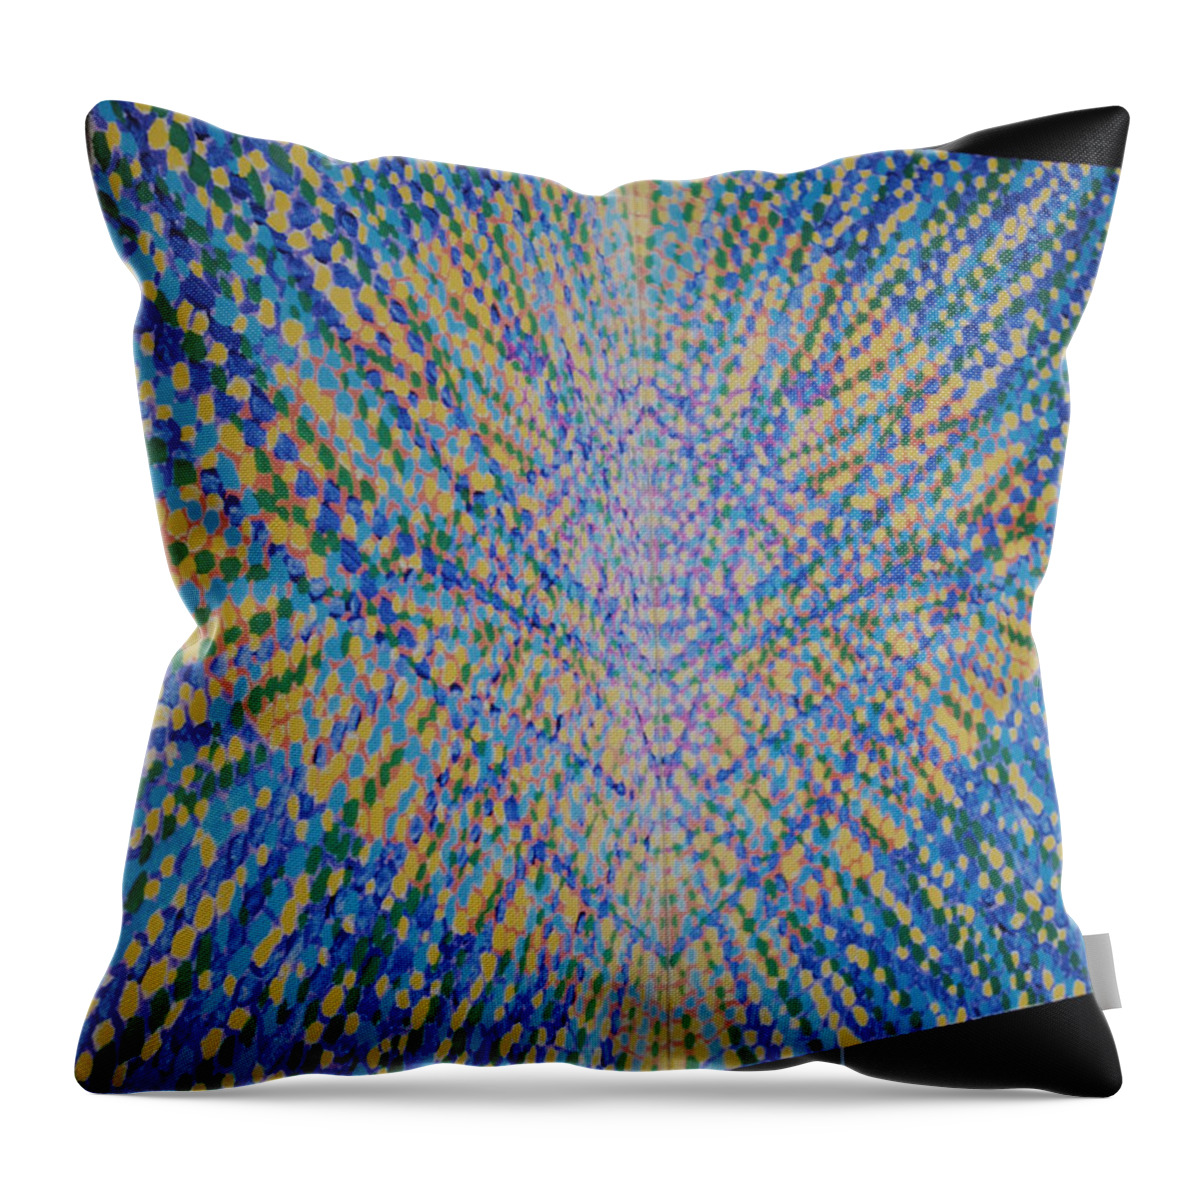 Inspirational Throw Pillow featuring the painting Butterfly Dream #4 by Kyung Hee Hogg